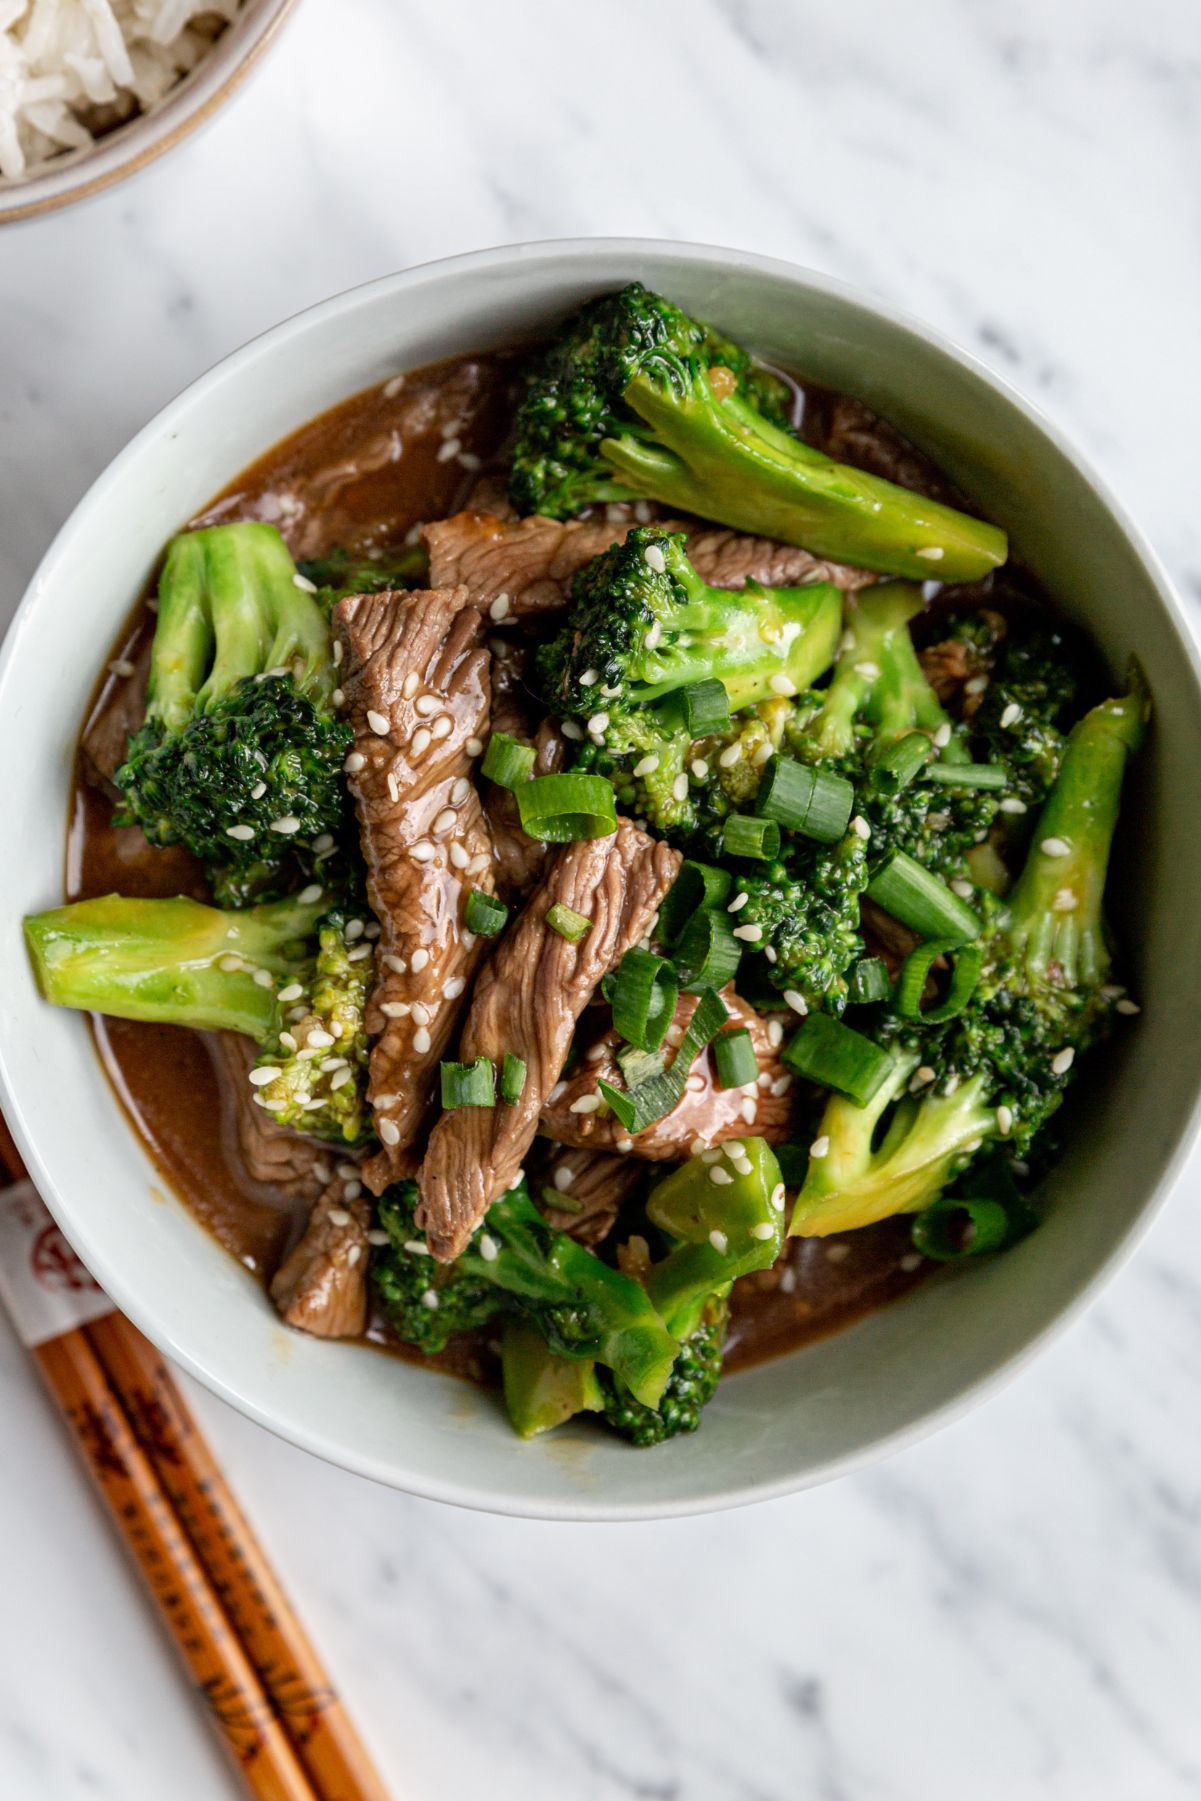 Overhead view of Weight Watchers Spicy Beef and Broccoli in a white bowl with chopsticks next to it.